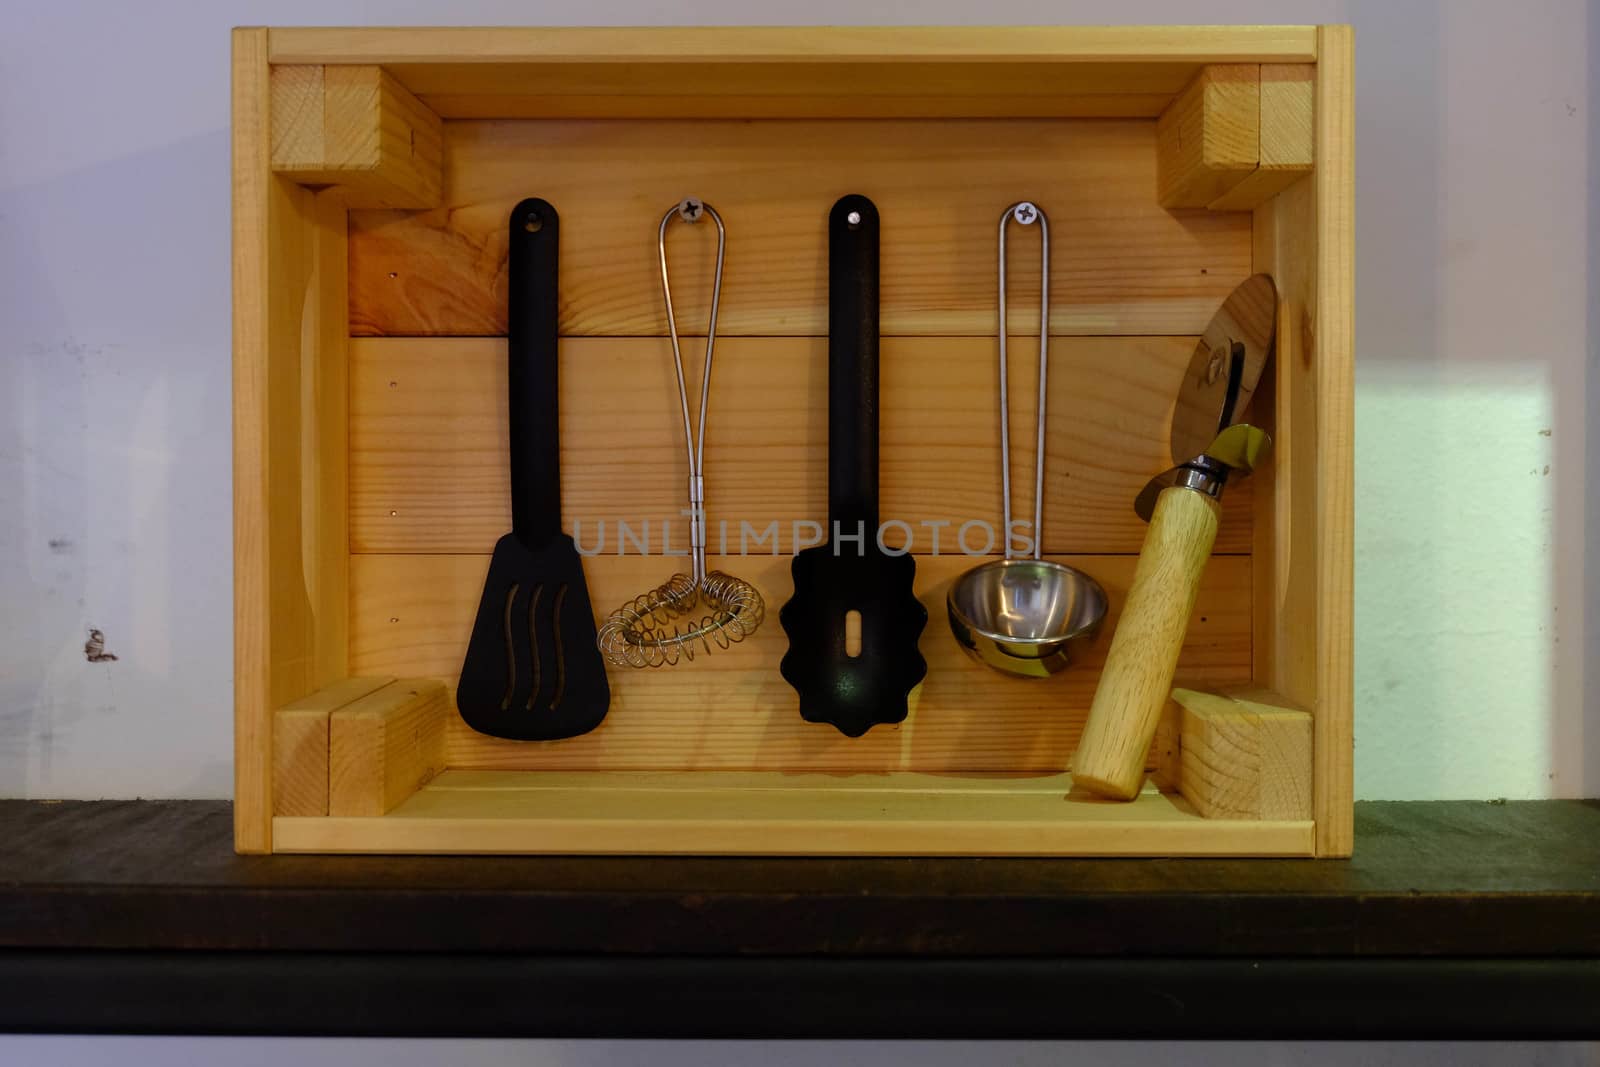 Kitchenware in a wooden box with a rectangular shape. by e22xua